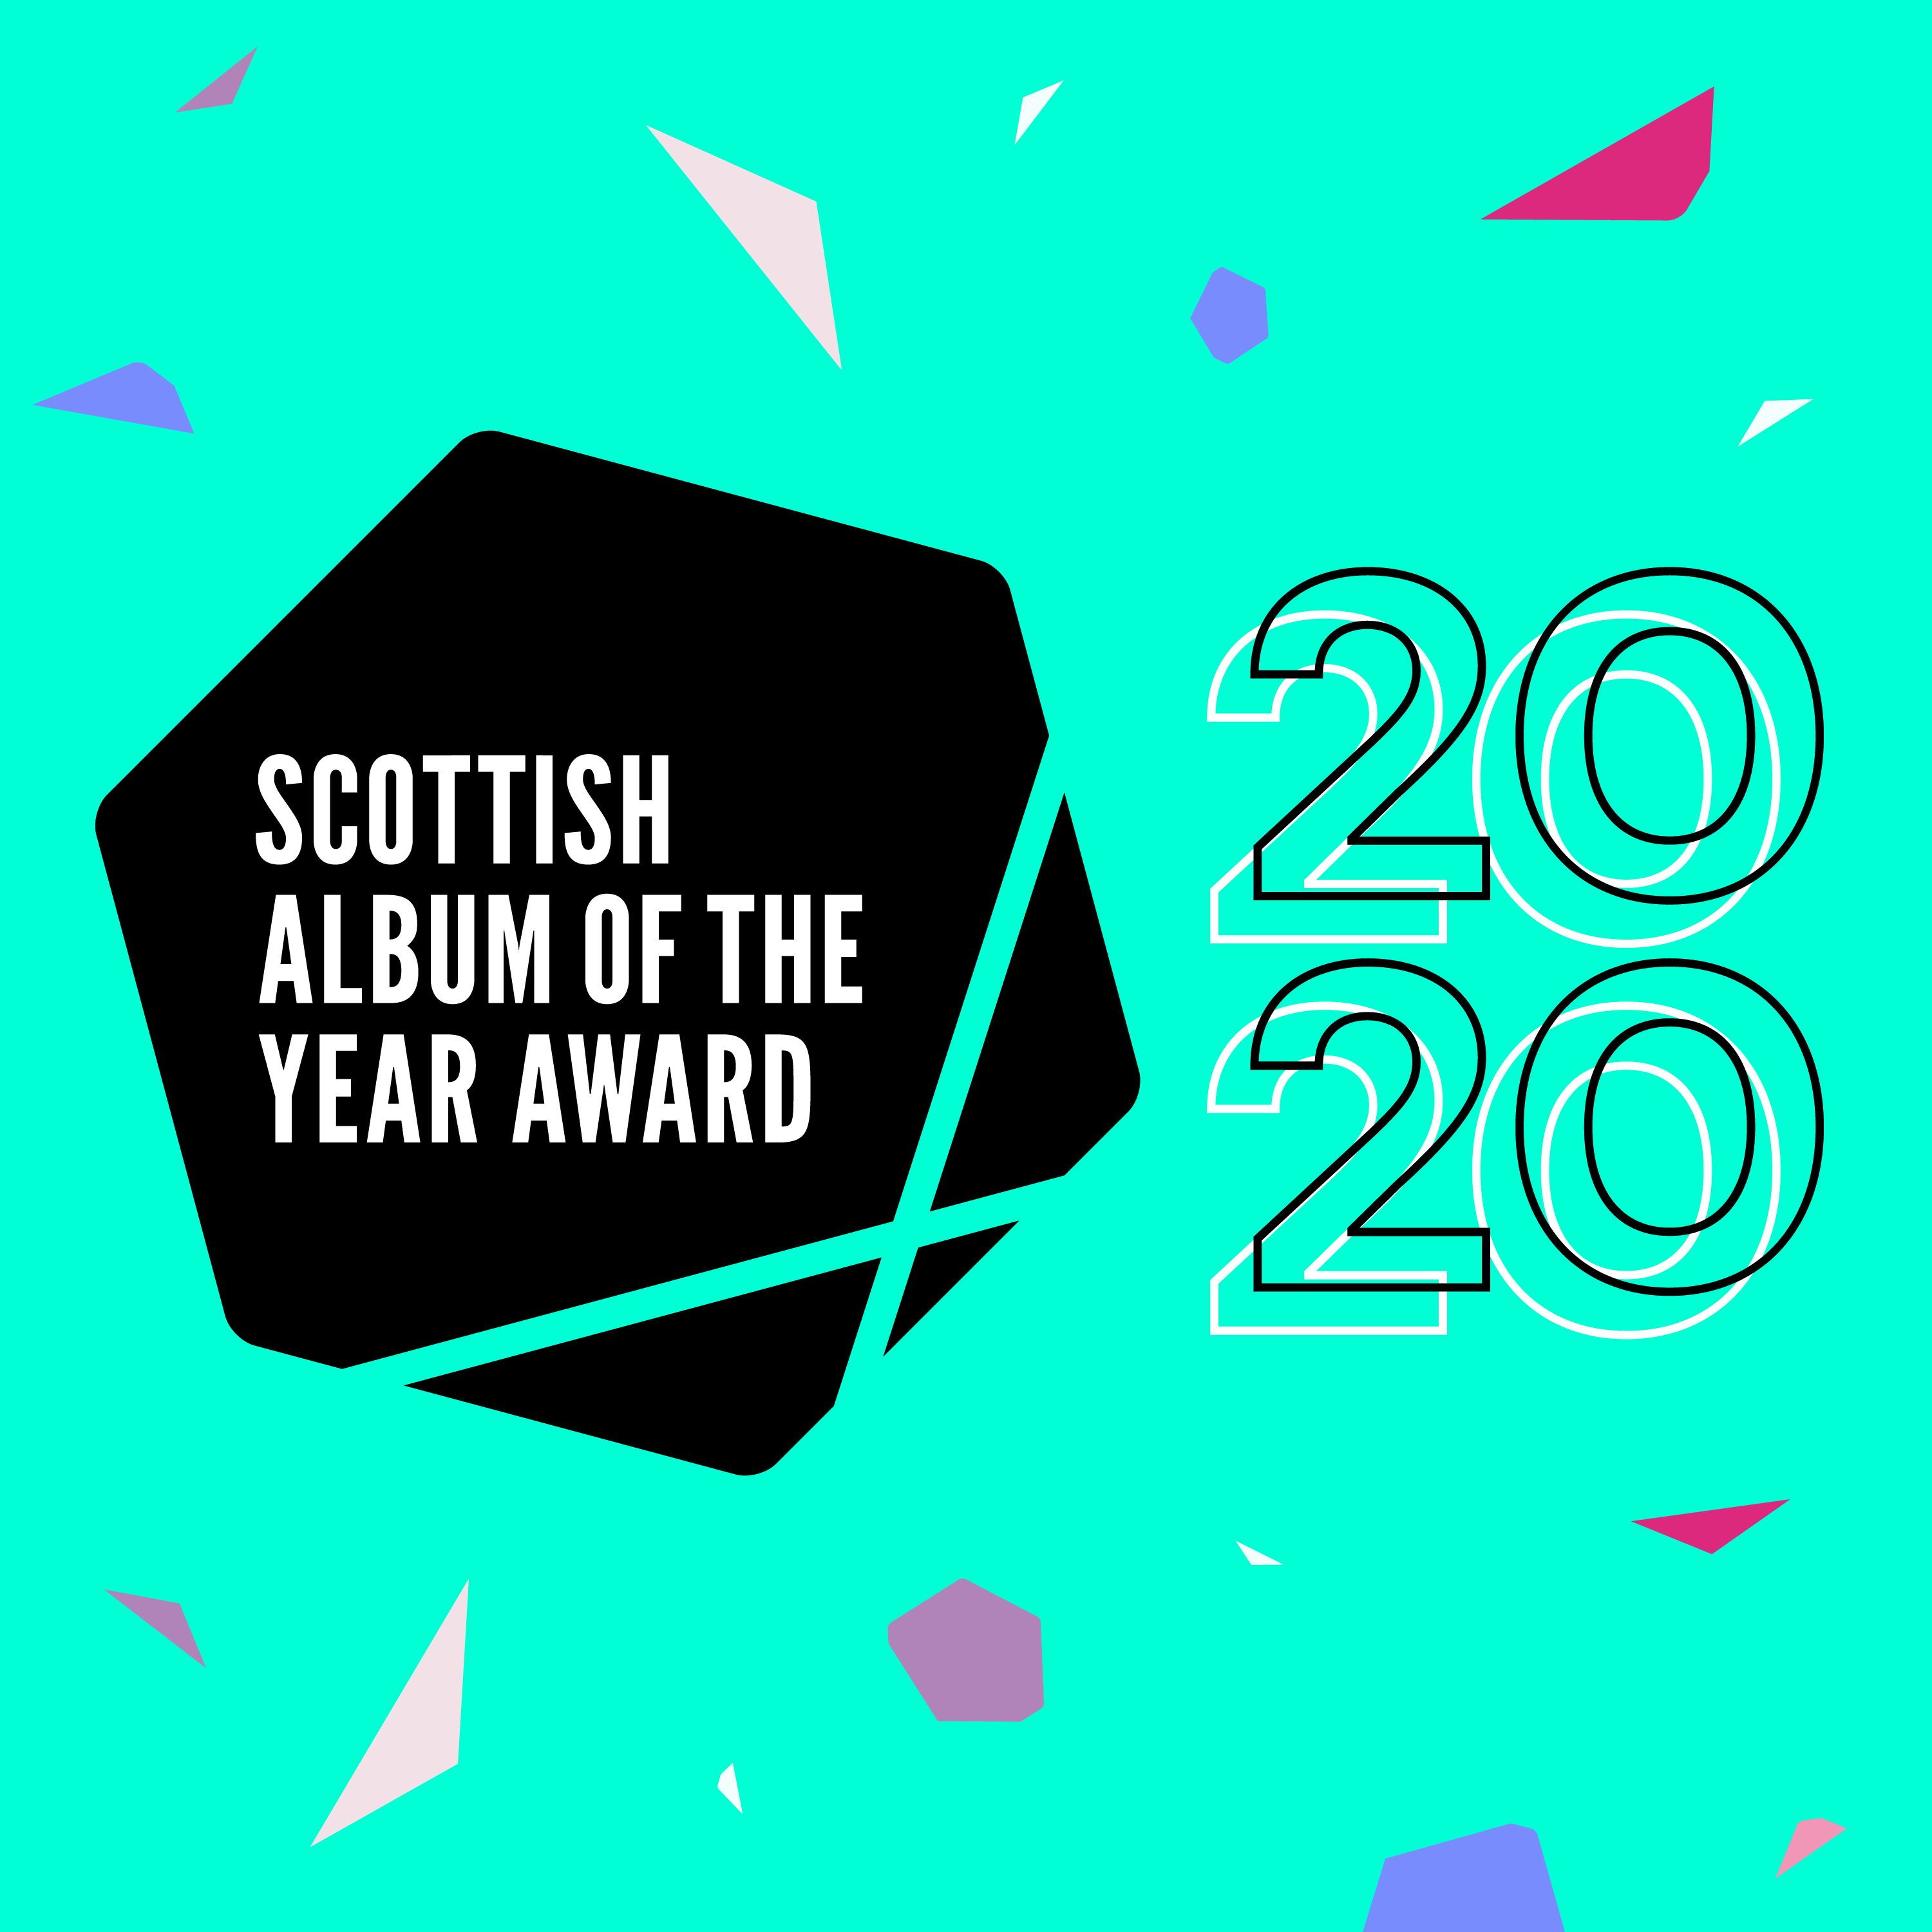 Preview | The Scottish Album of the Year Award goes digital